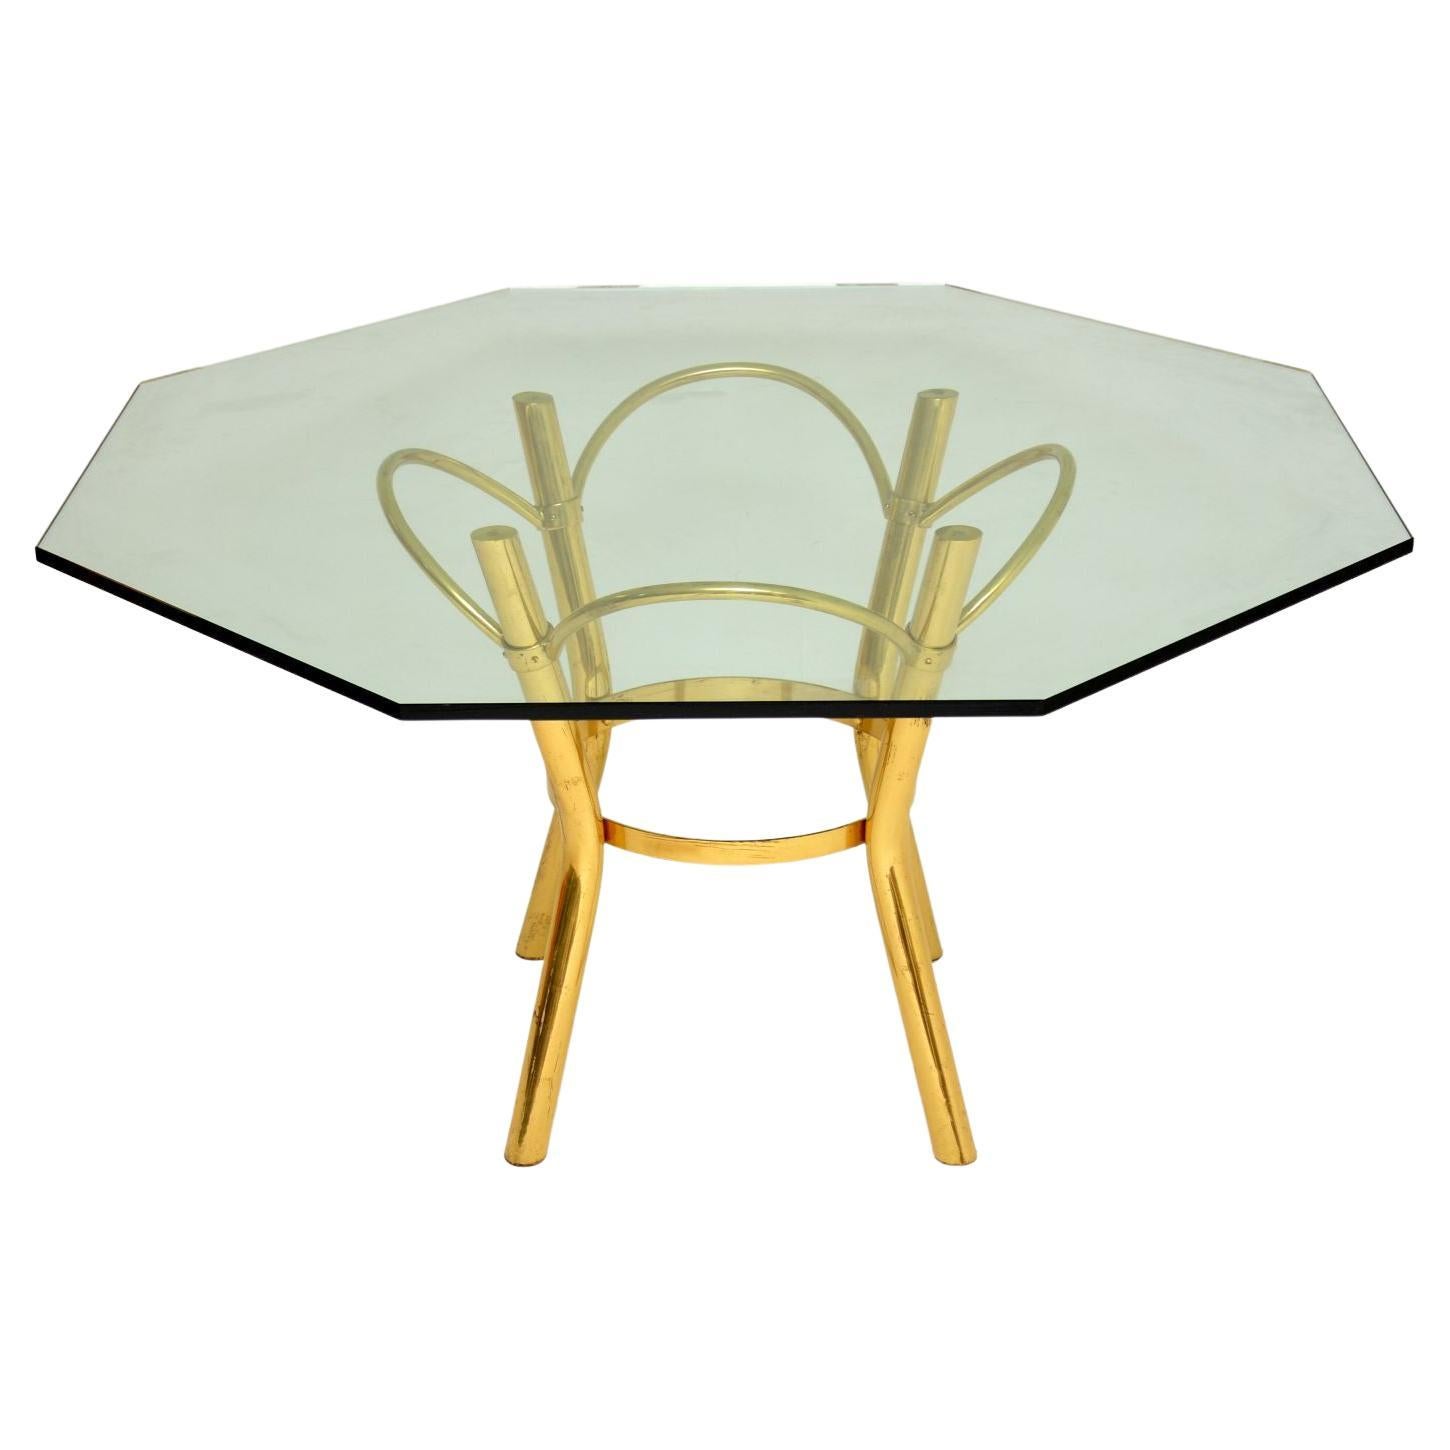 1970's Vintage Brass & Glass Dining Table